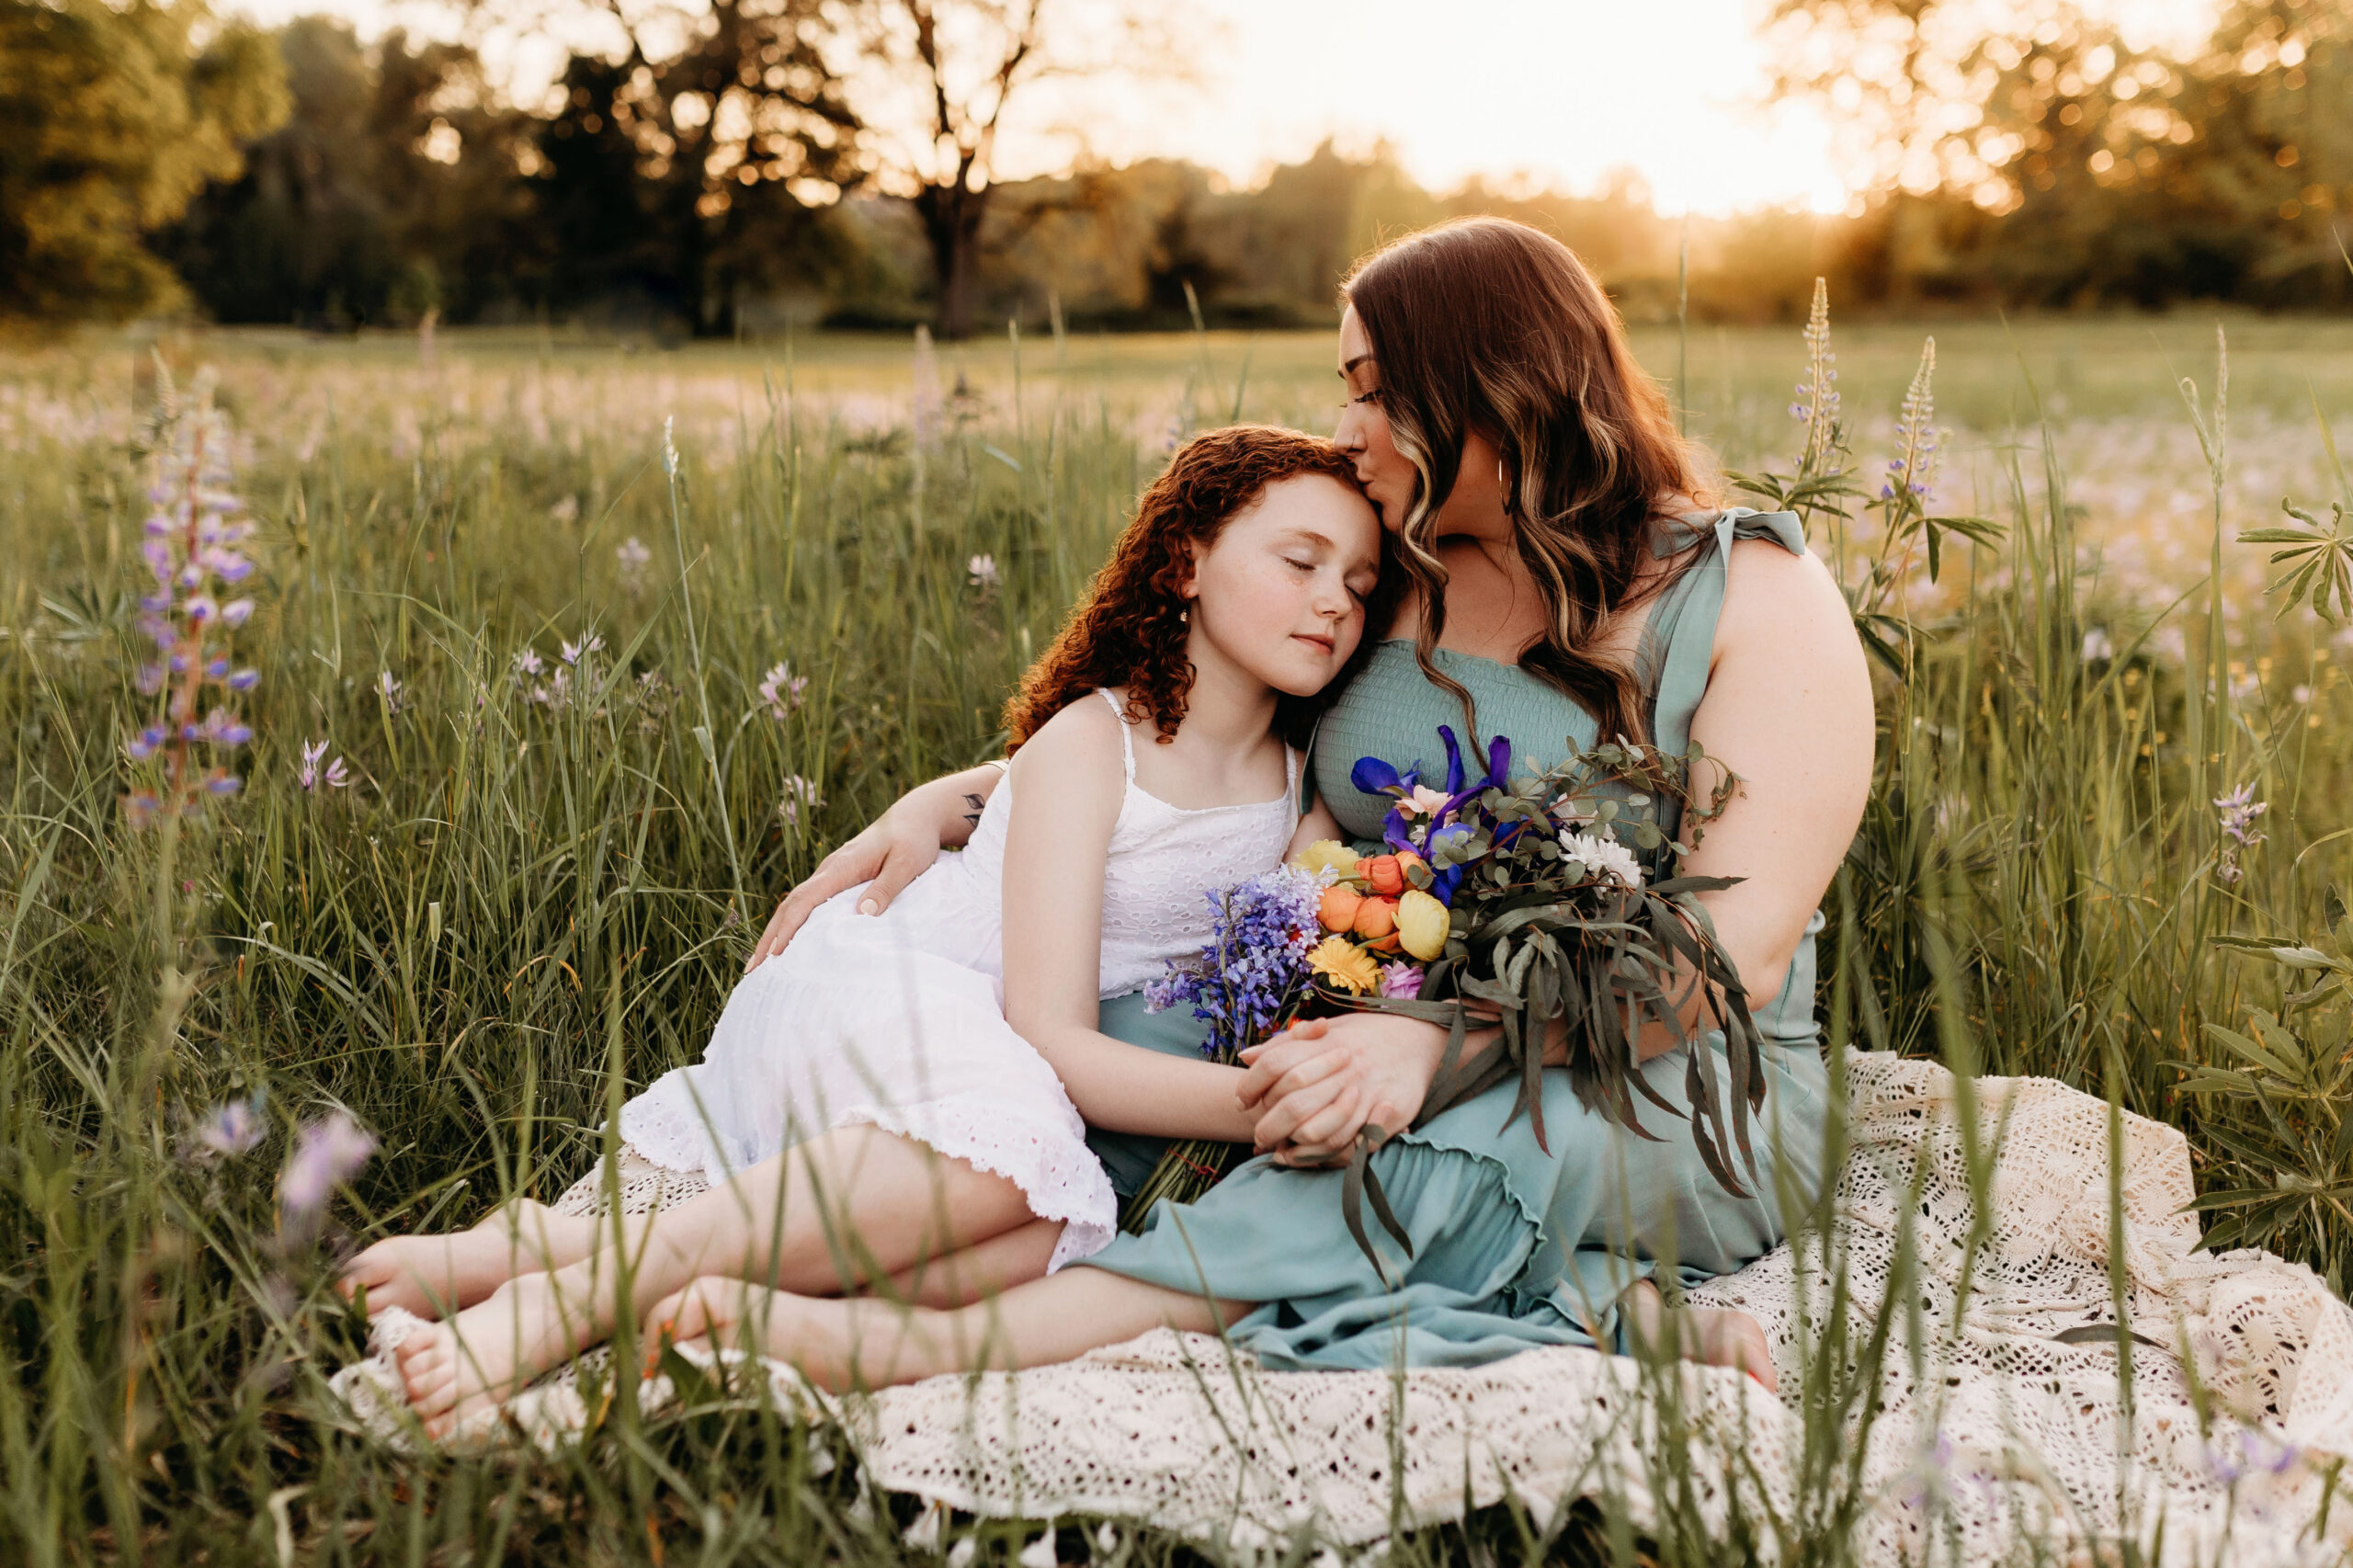 Oregon and Washington family photographer with experience photographing families in wildflowers